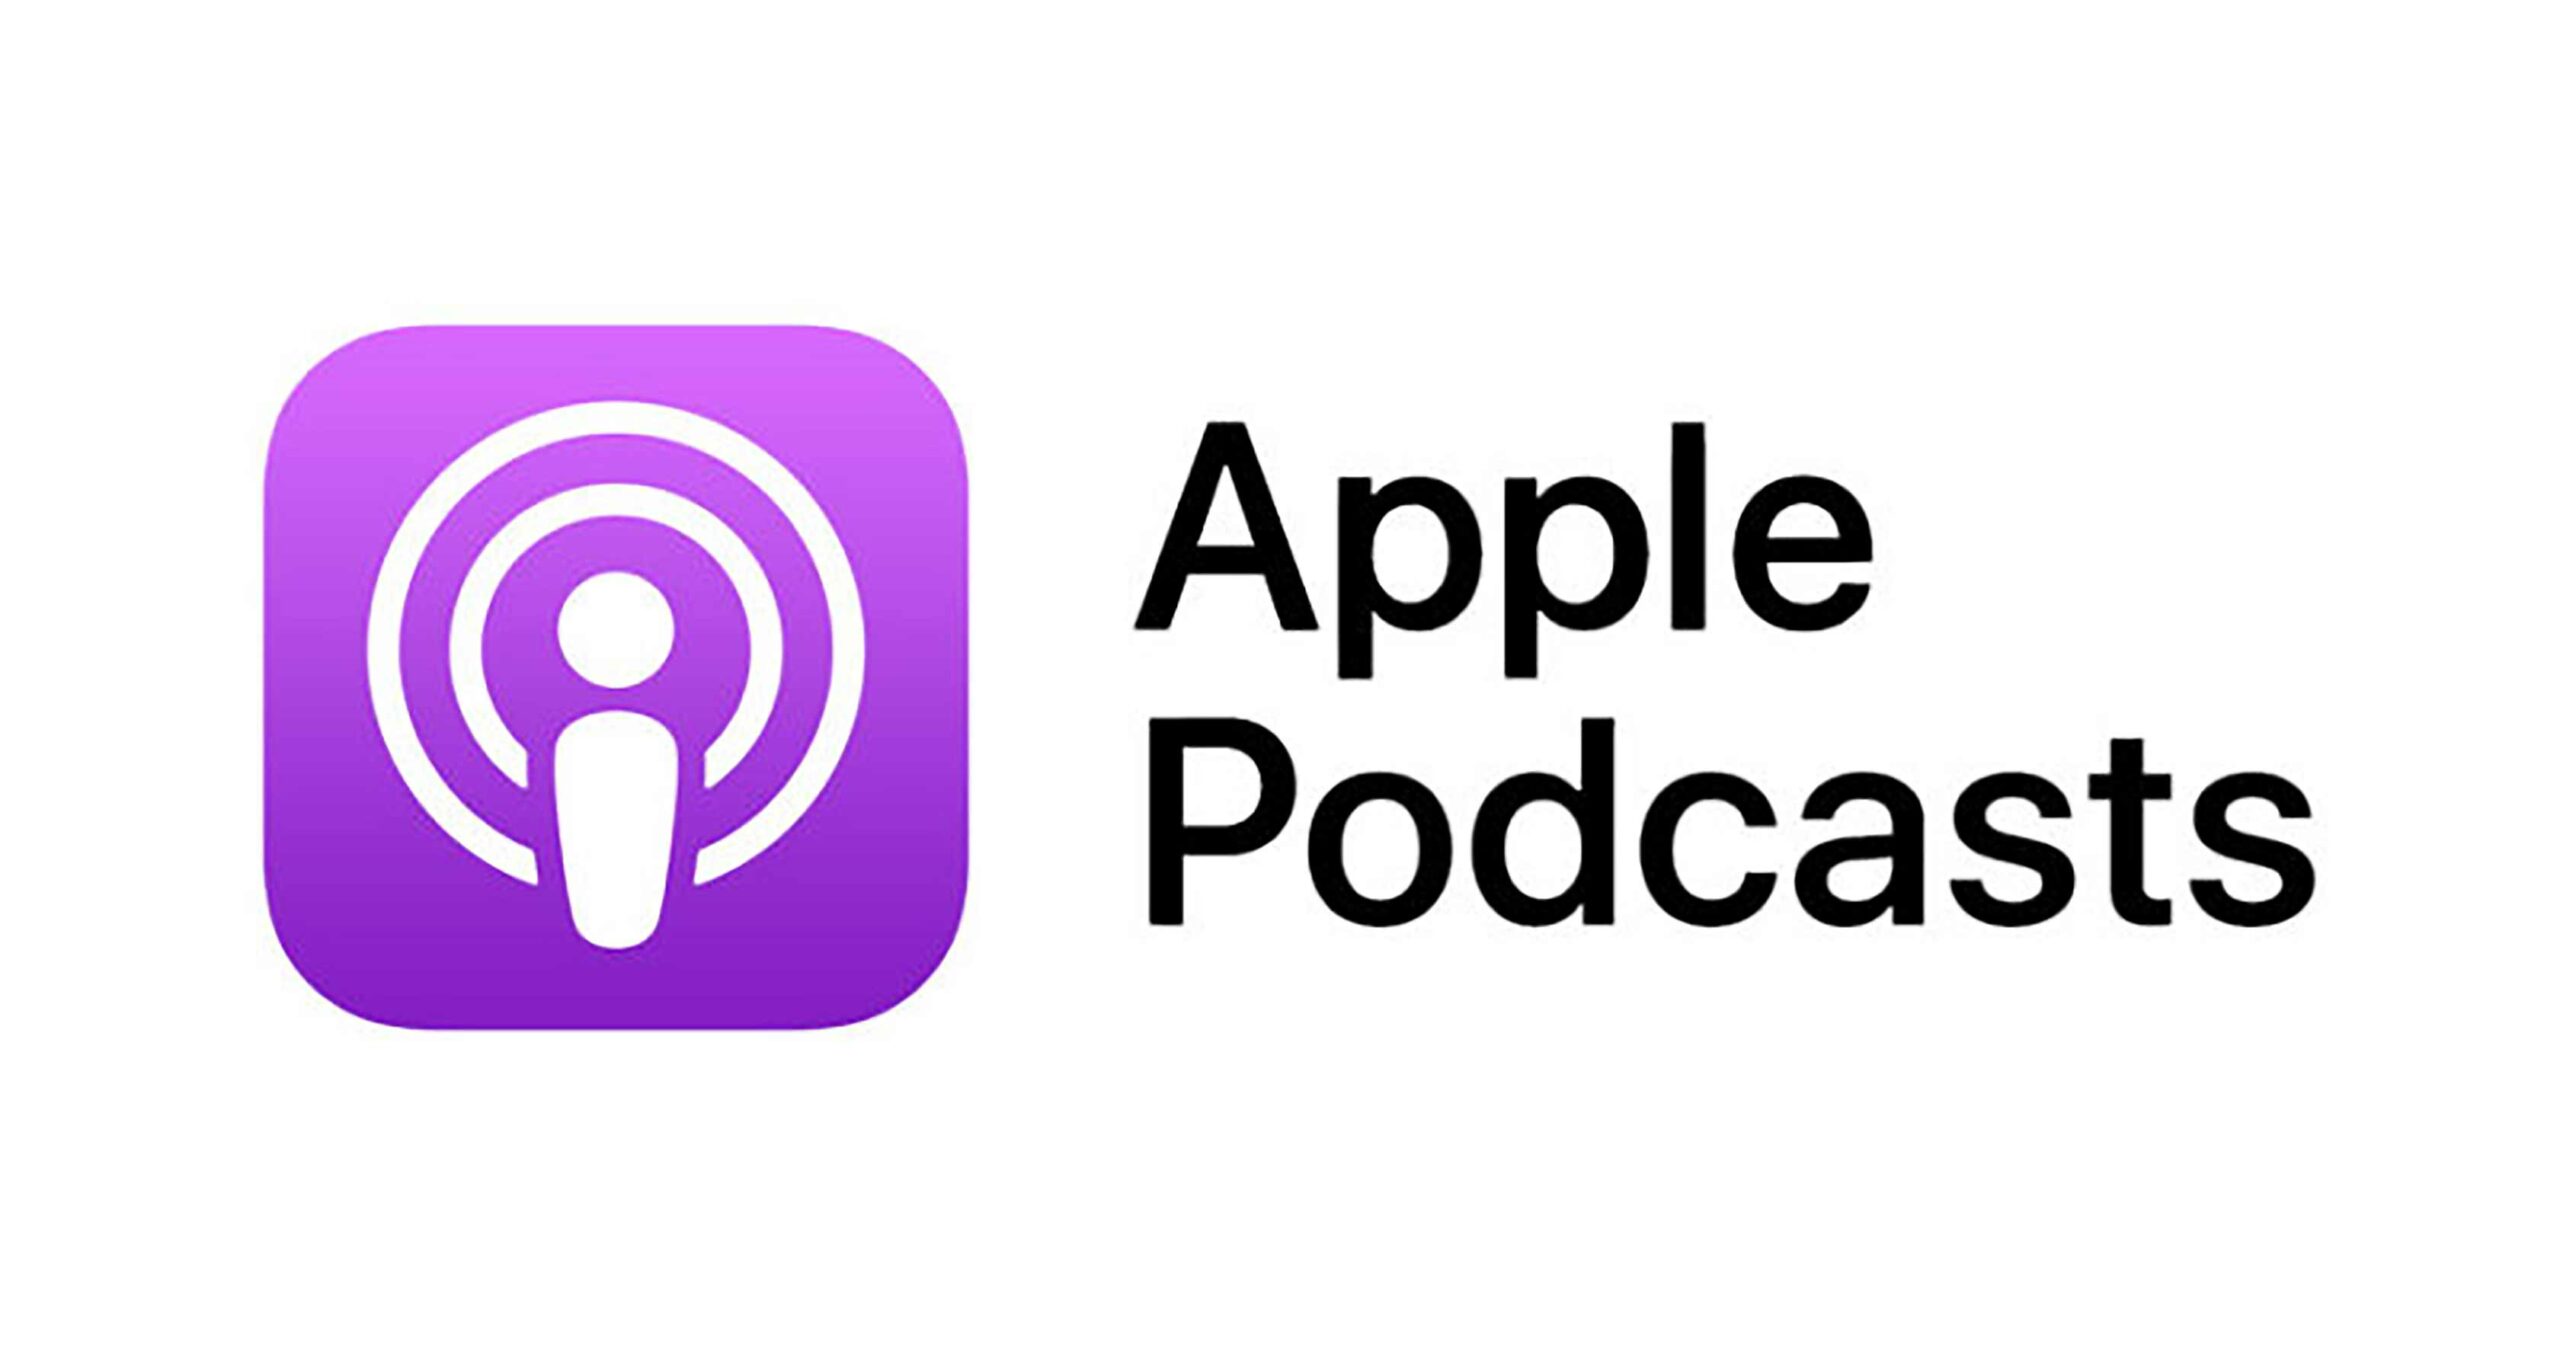 iOS 14 to include revamped Podcasts app with